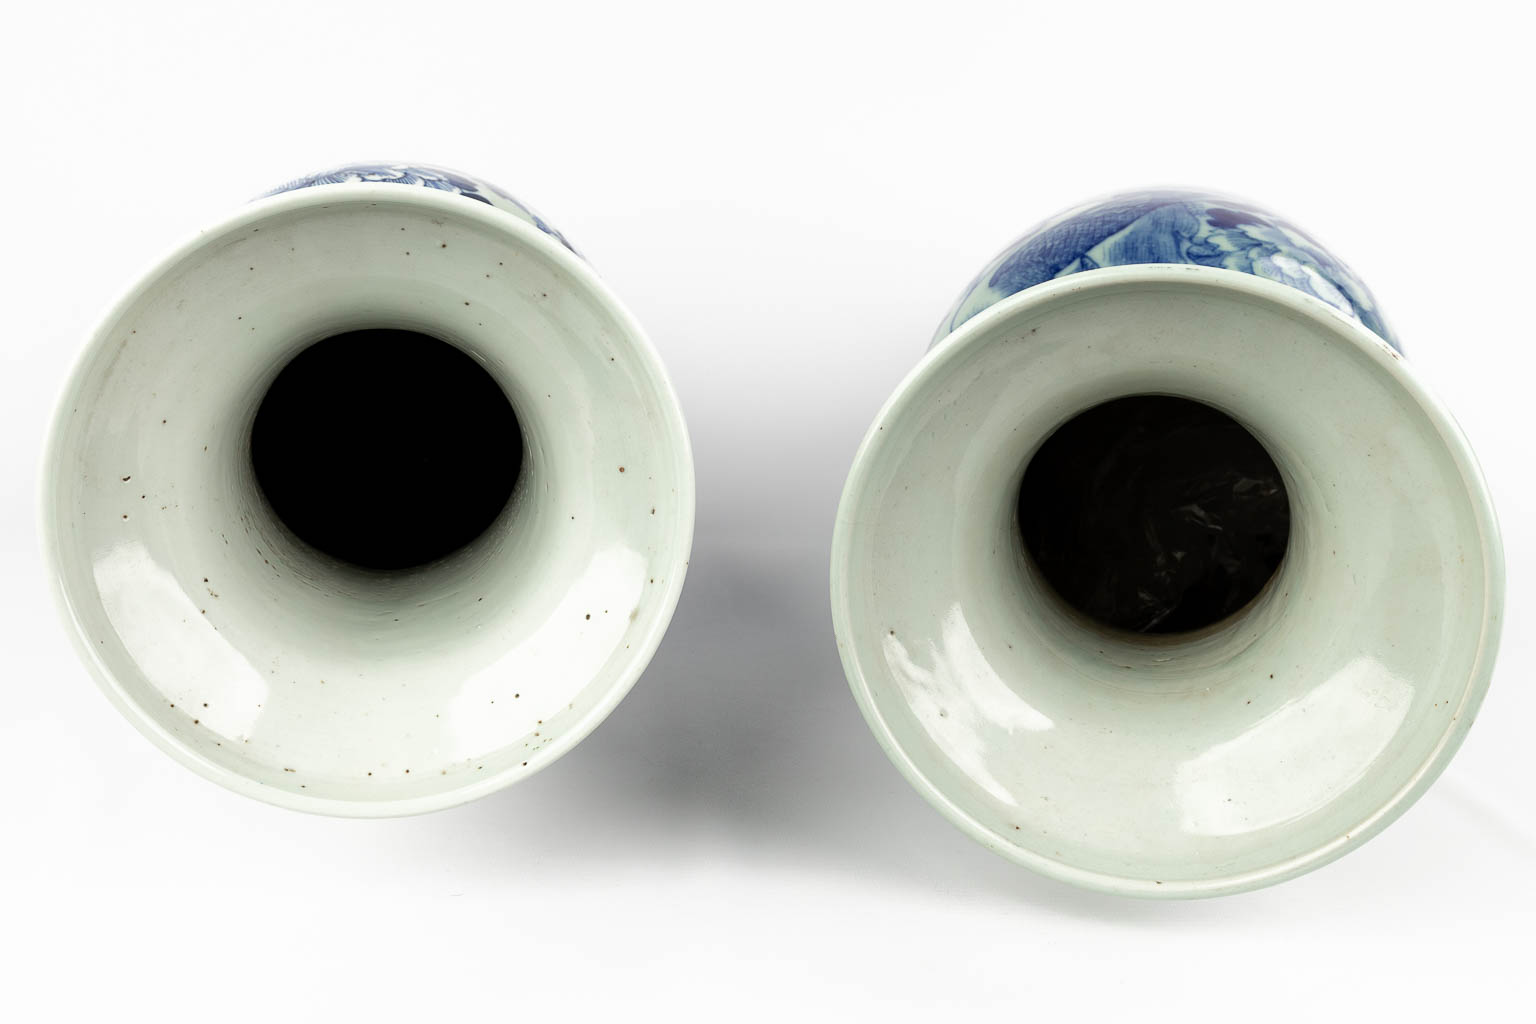 A set of 2 Chinese vases, blue-white decor. 19th/20th C. (H: 58 x D: 23 cm)